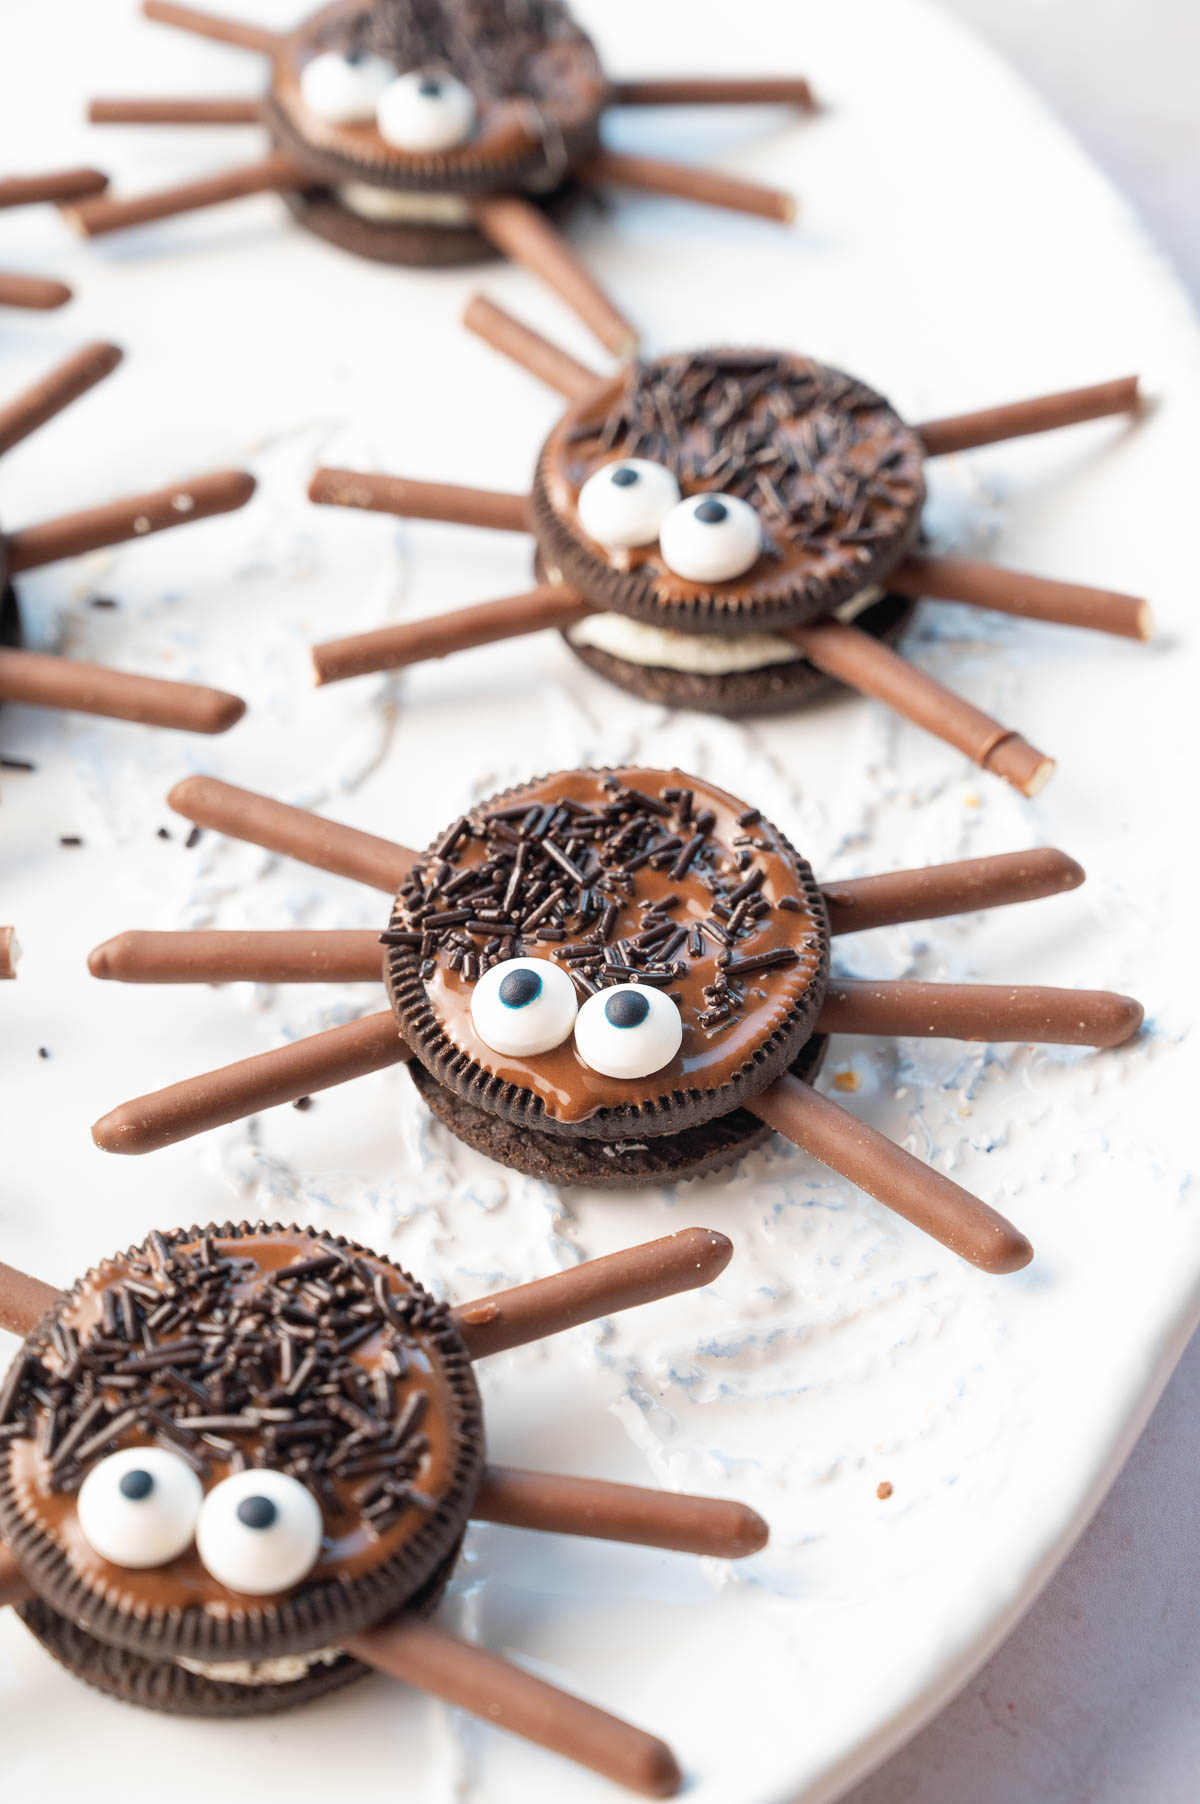 Aggregate more than 127 decorate oreos for halloween latest - seven.edu.vn